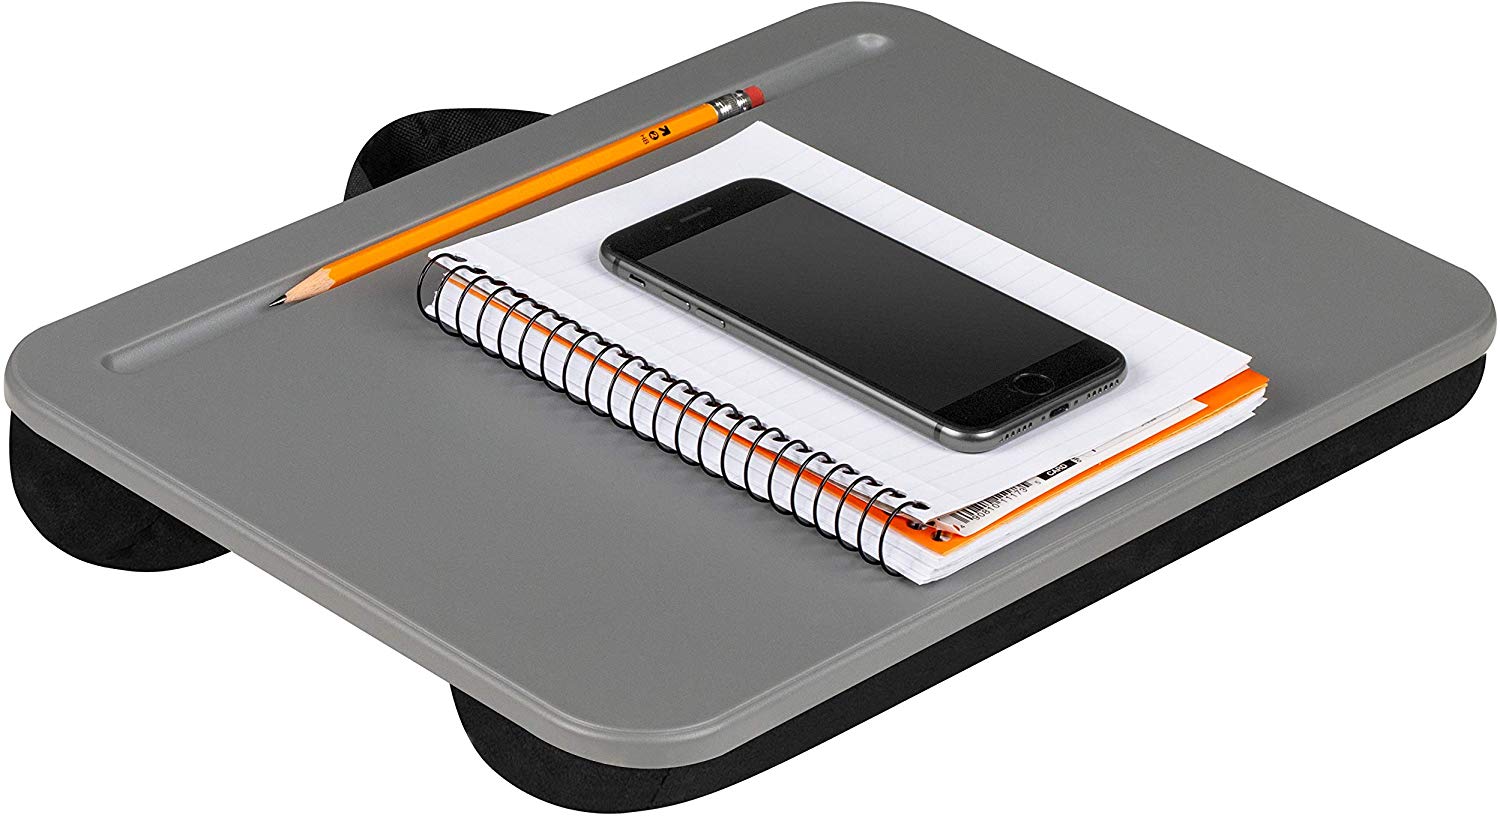 A gray desk top with a pencil, notebook and phone on top. The bottom of the desk is soft and squishy to rest comfortably on your lap